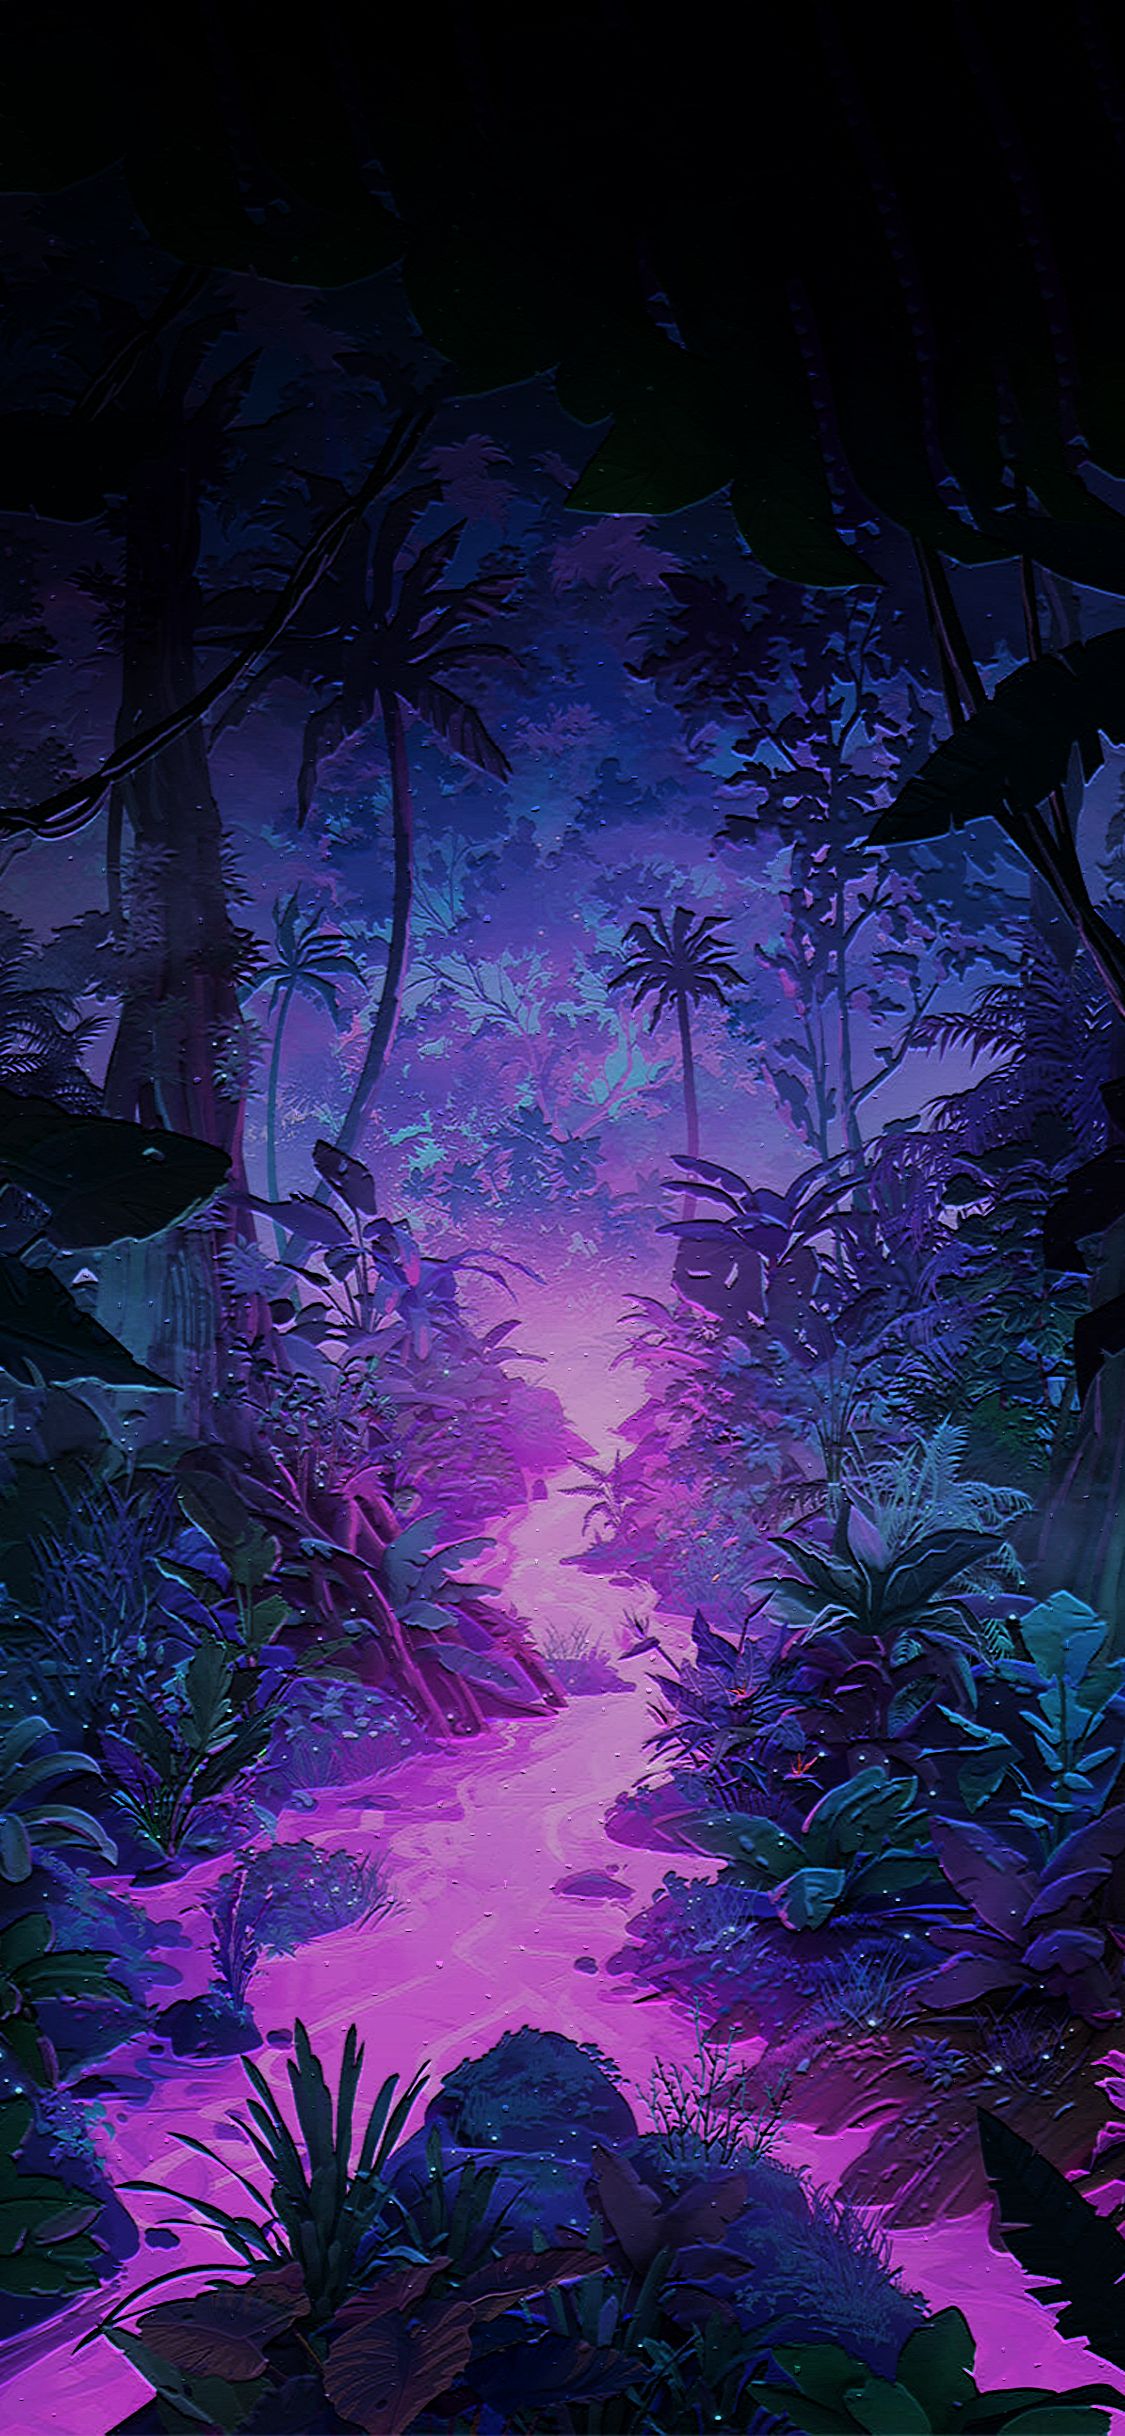 IPhone wallpaper of a neon pink river in a dark forest - Jungle